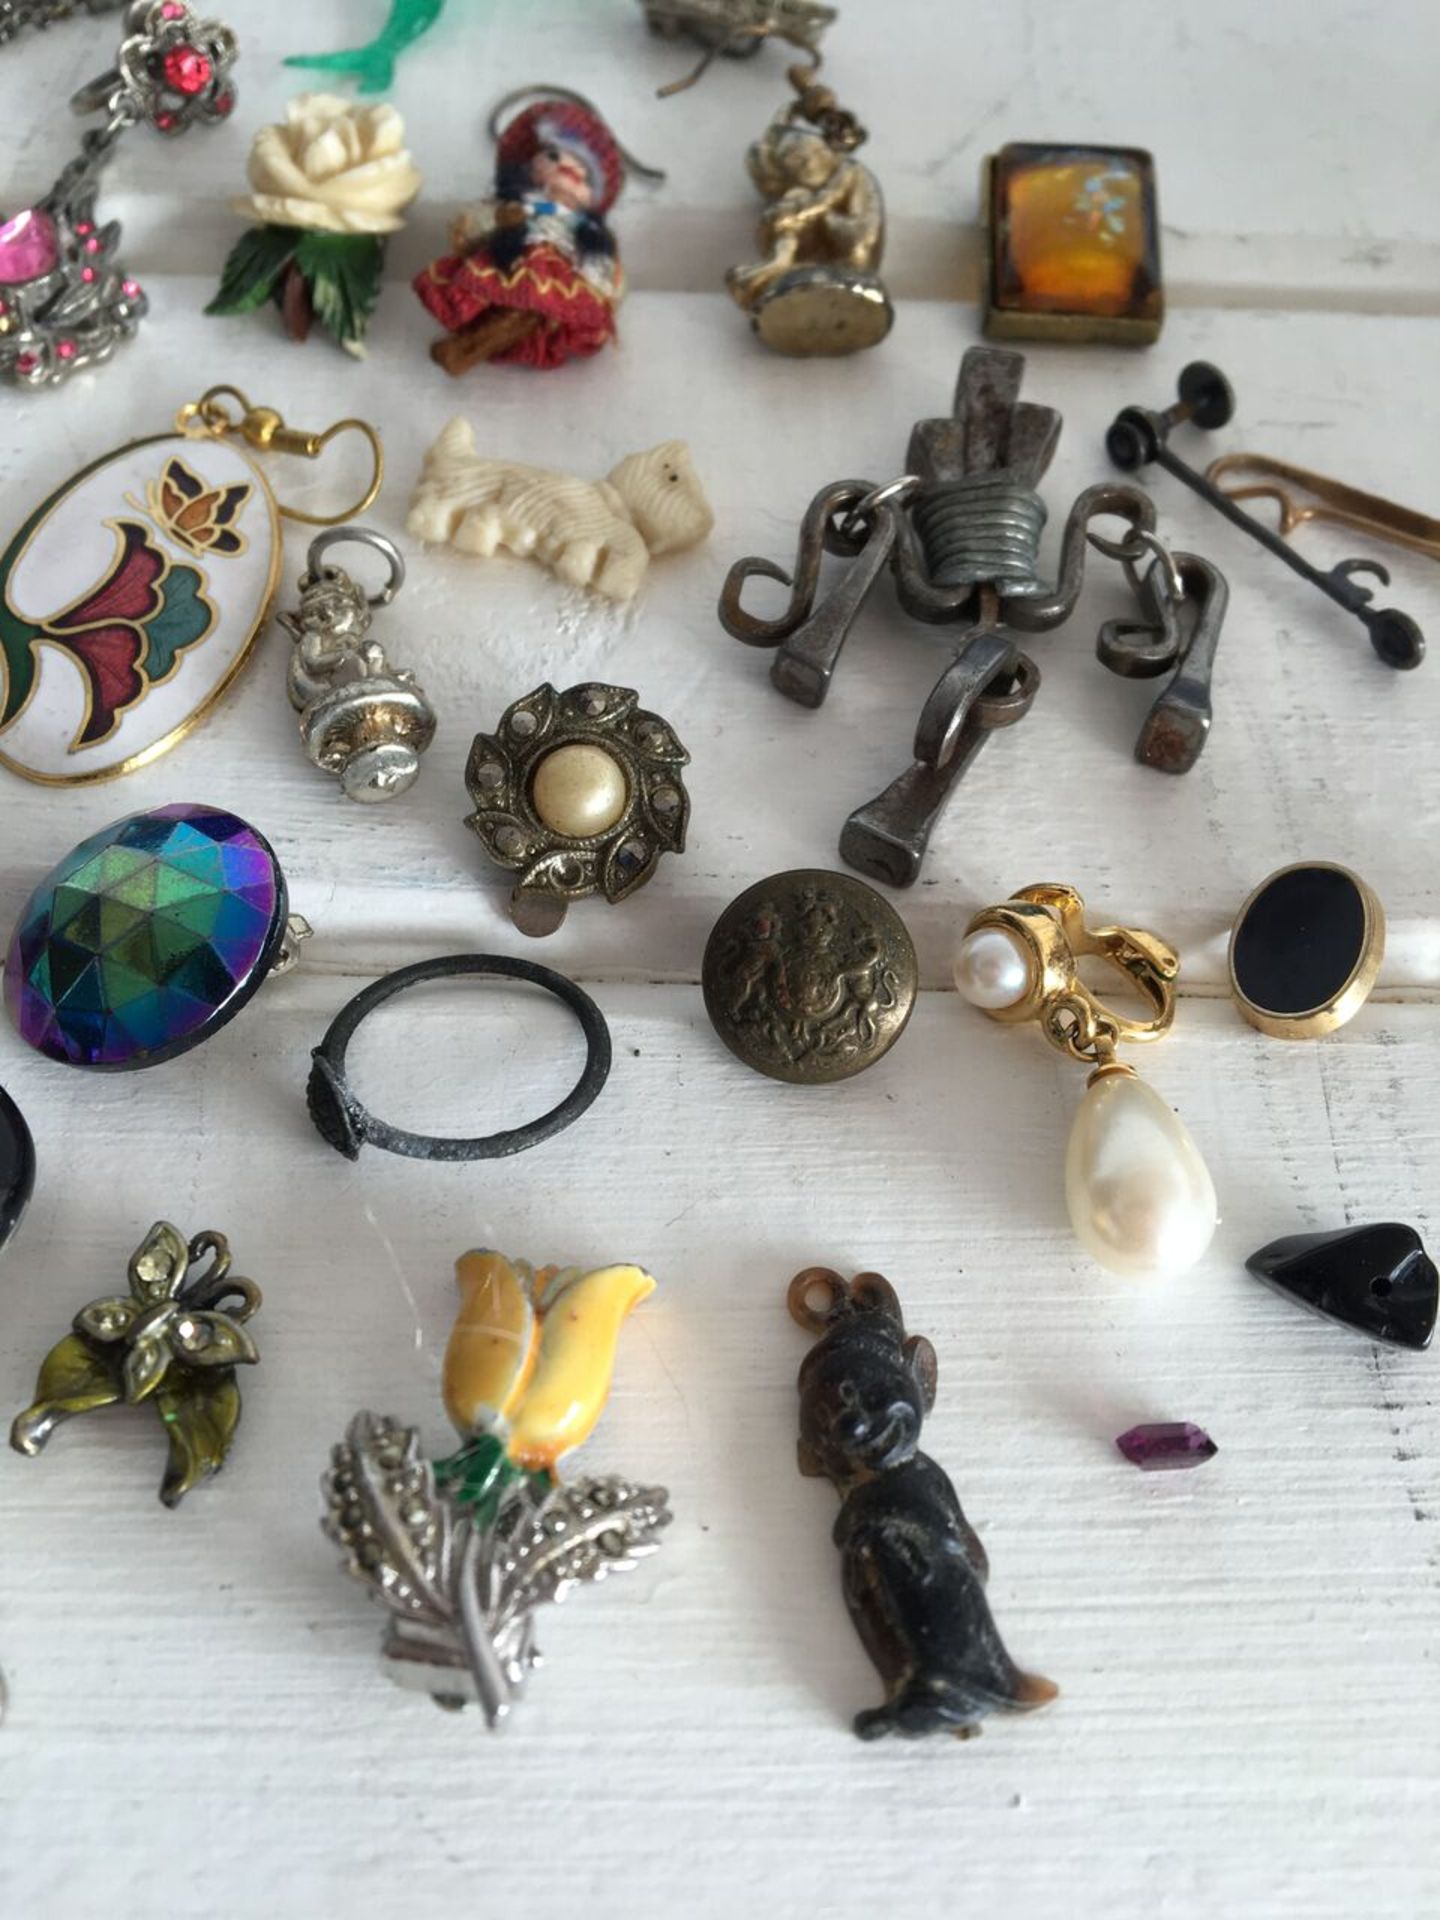 COLLECTION OF SMALL CHARMS, PENDANTS, BUTTONS AND OTHER VINTAGE CURIOS (APPROX 44 ITEMS IN TOTAL). - Bild 4 aus 5